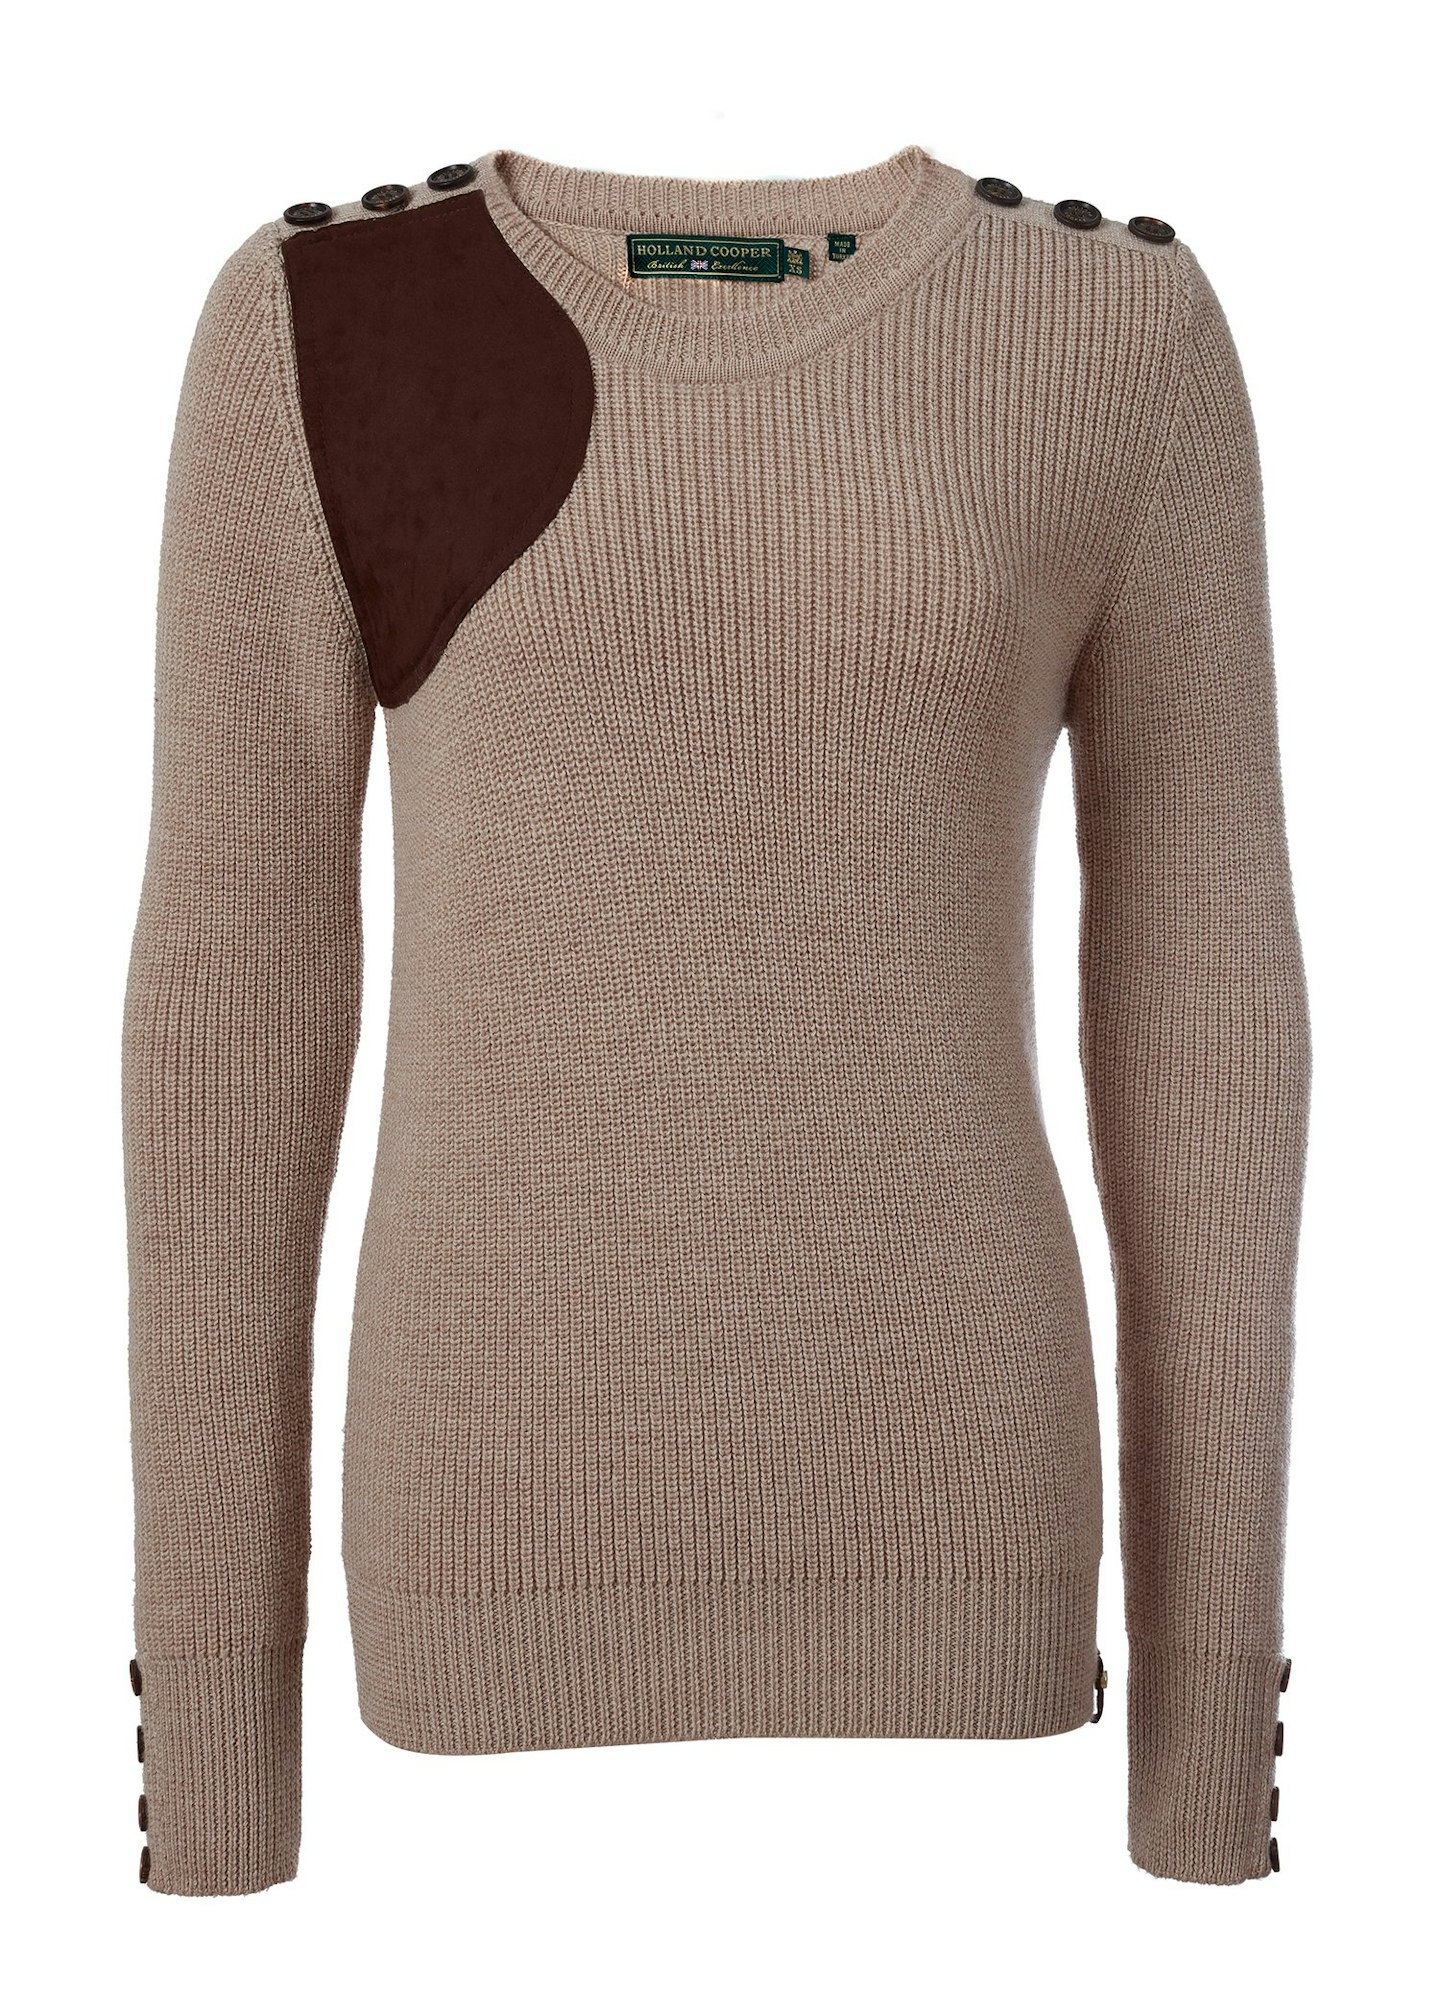 Holland Cooper, Country Crew Neck Knit, £125